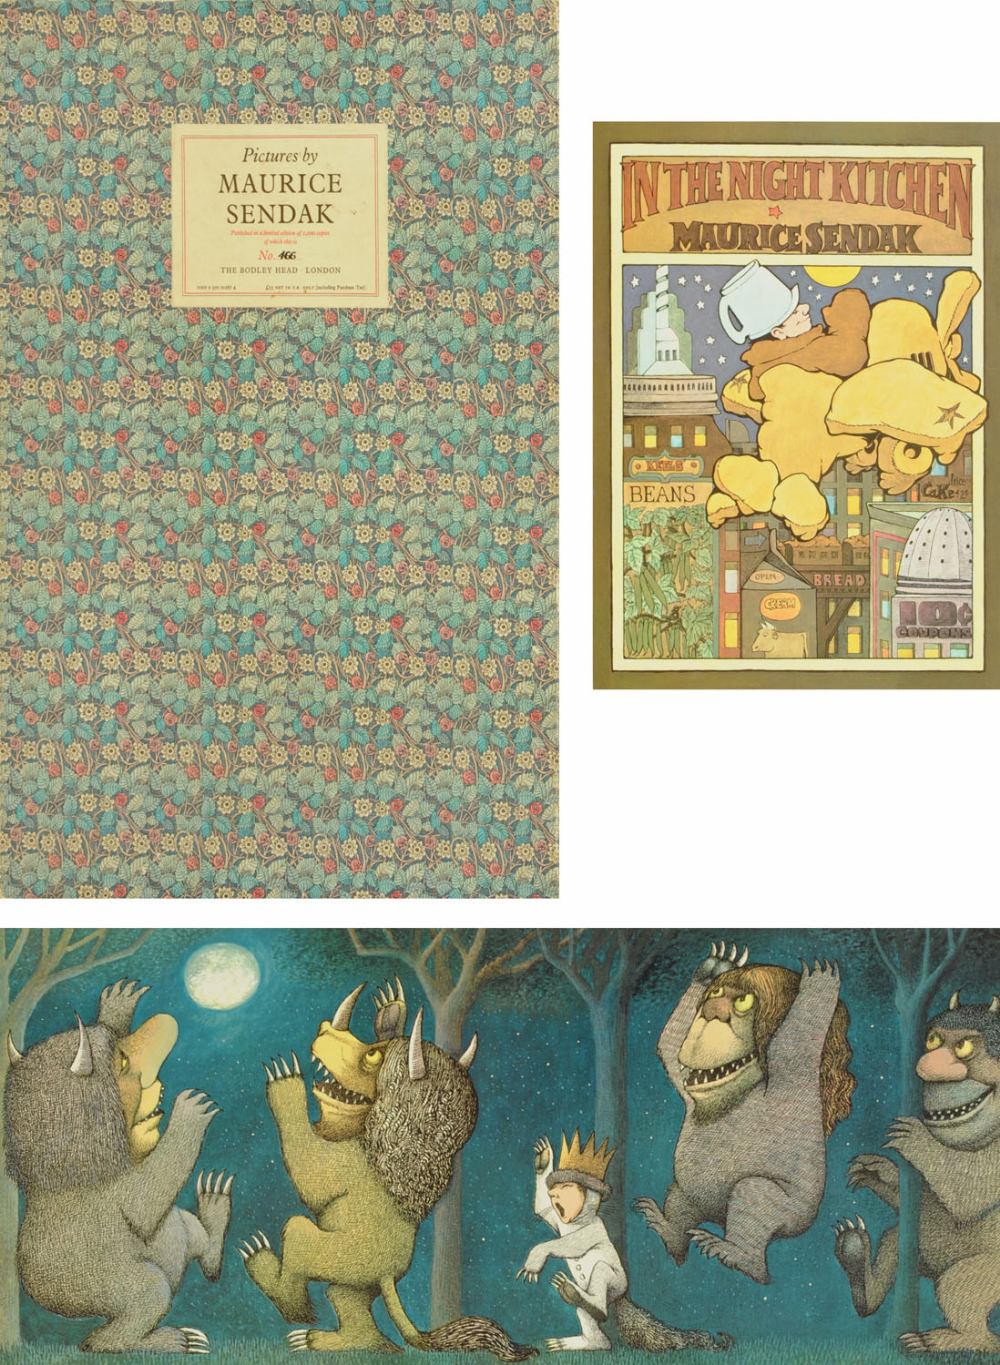 Maurice Sendak, limited edition series of pictures, by The Bodley Head, 466/1000, depicting images